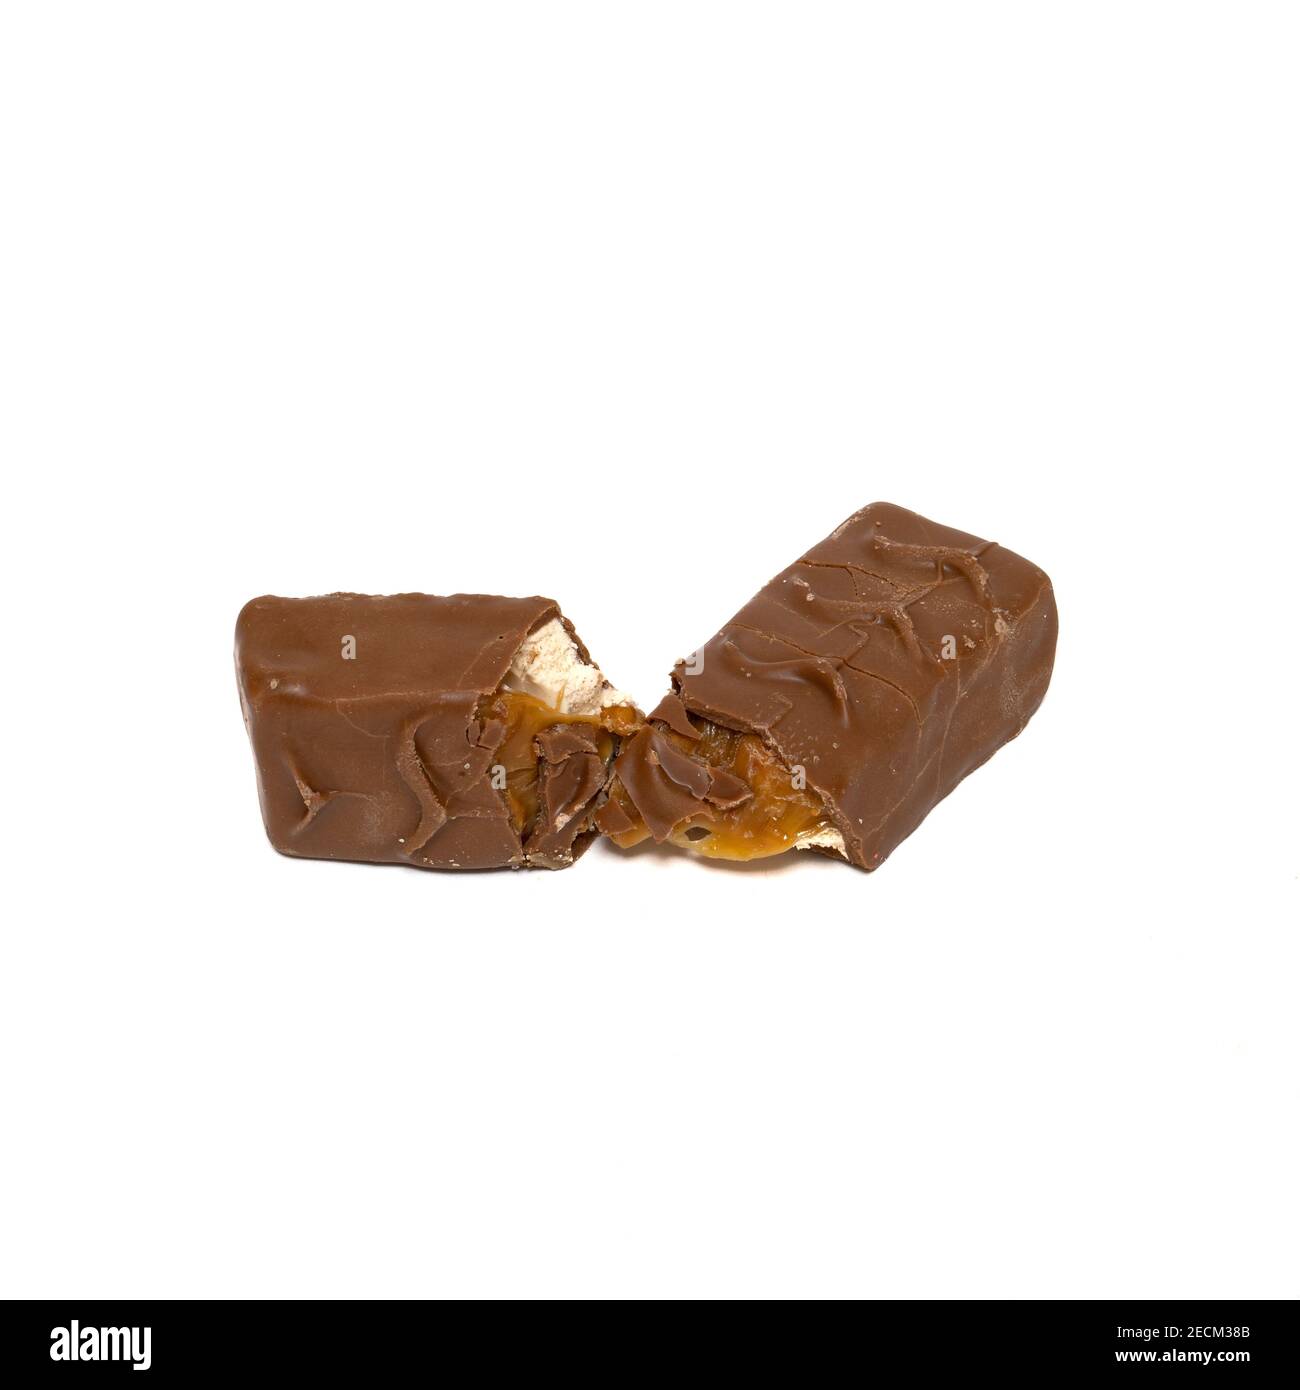 Snickers chocolate bar isolated on white background Stock Photo - Alamy